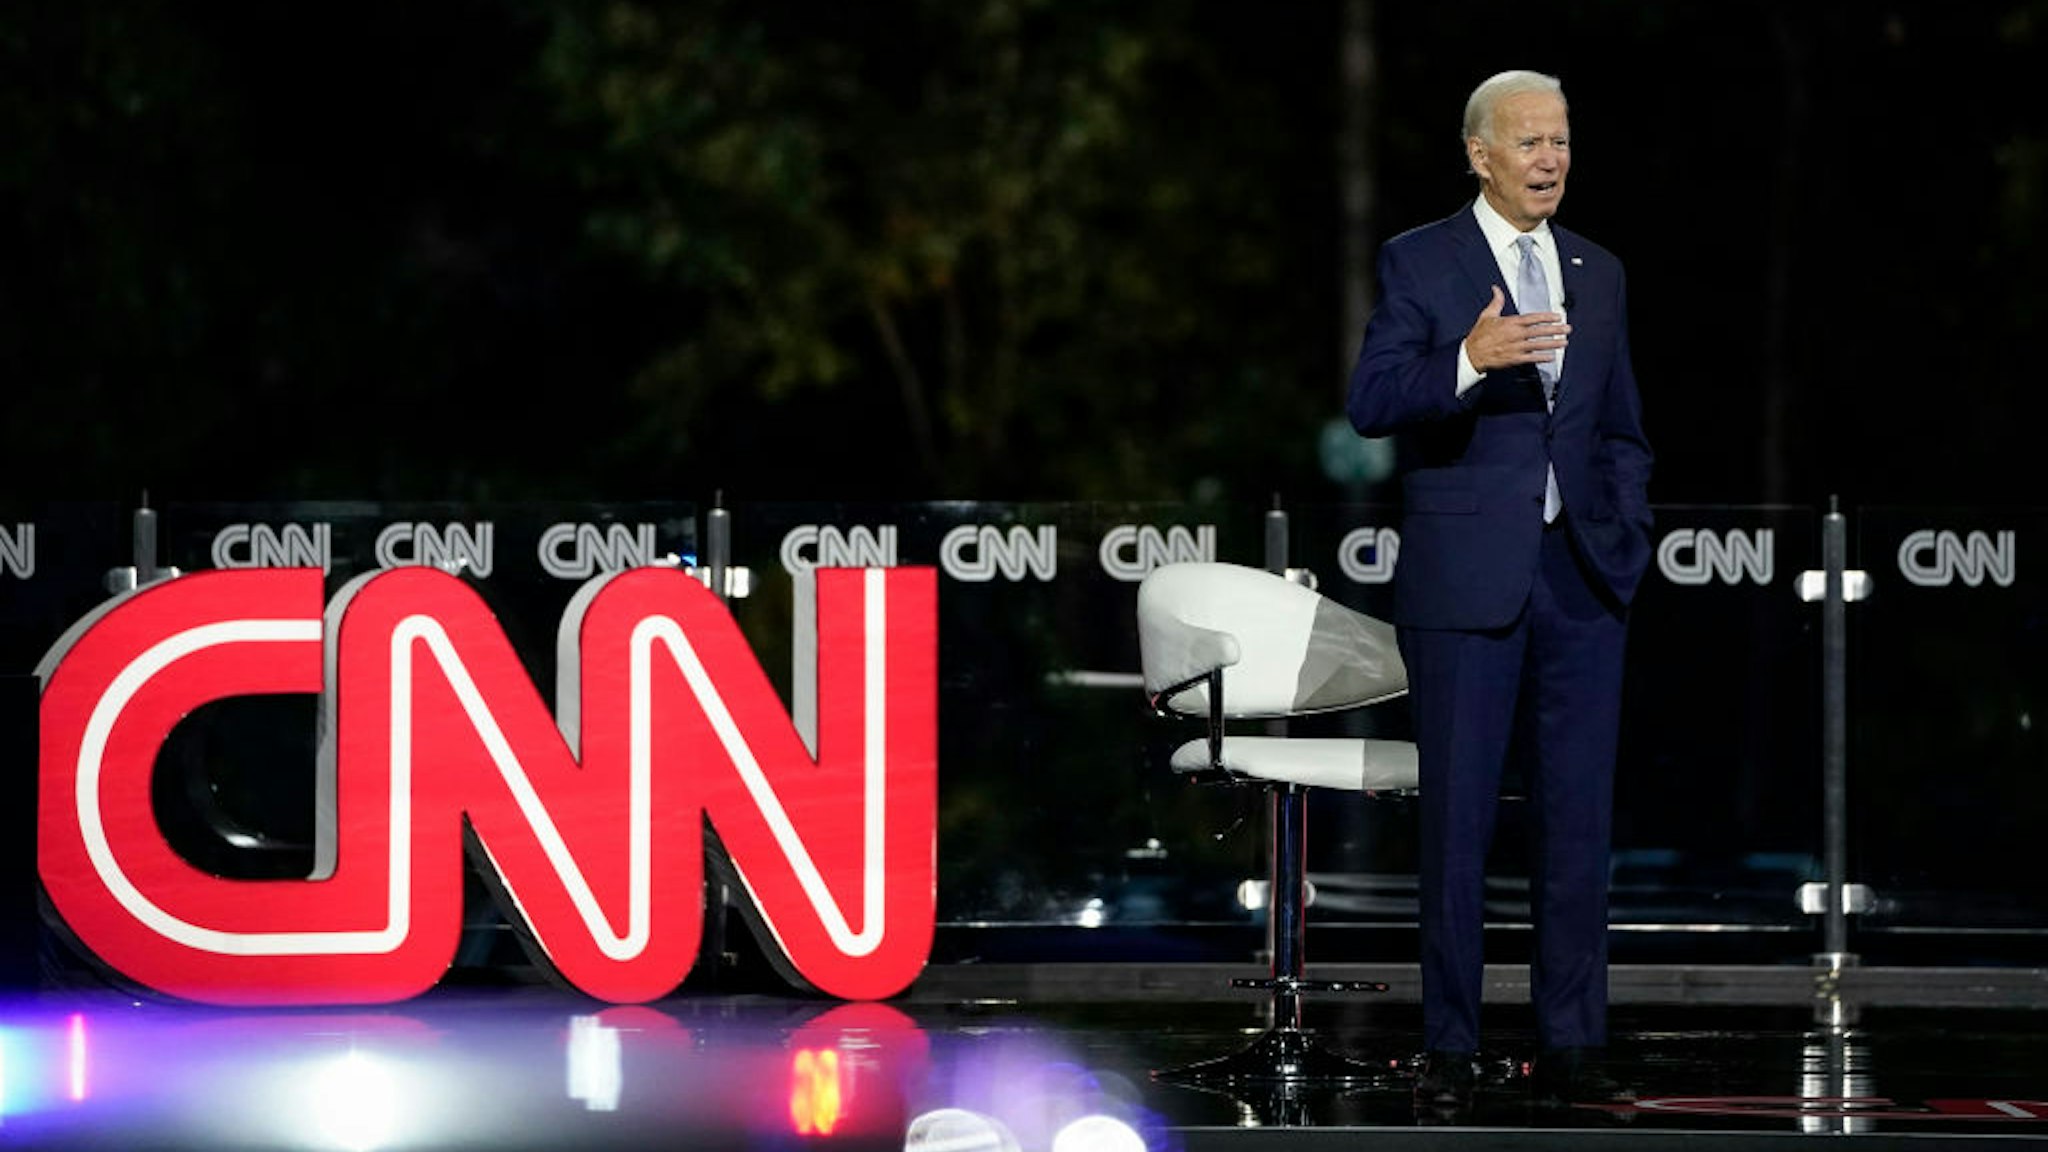 Democratic presidential nominee and former Vice President Joe Biden participates in a CNN town hall event on September 17, 2020 in Moosic, Pennsylvania.